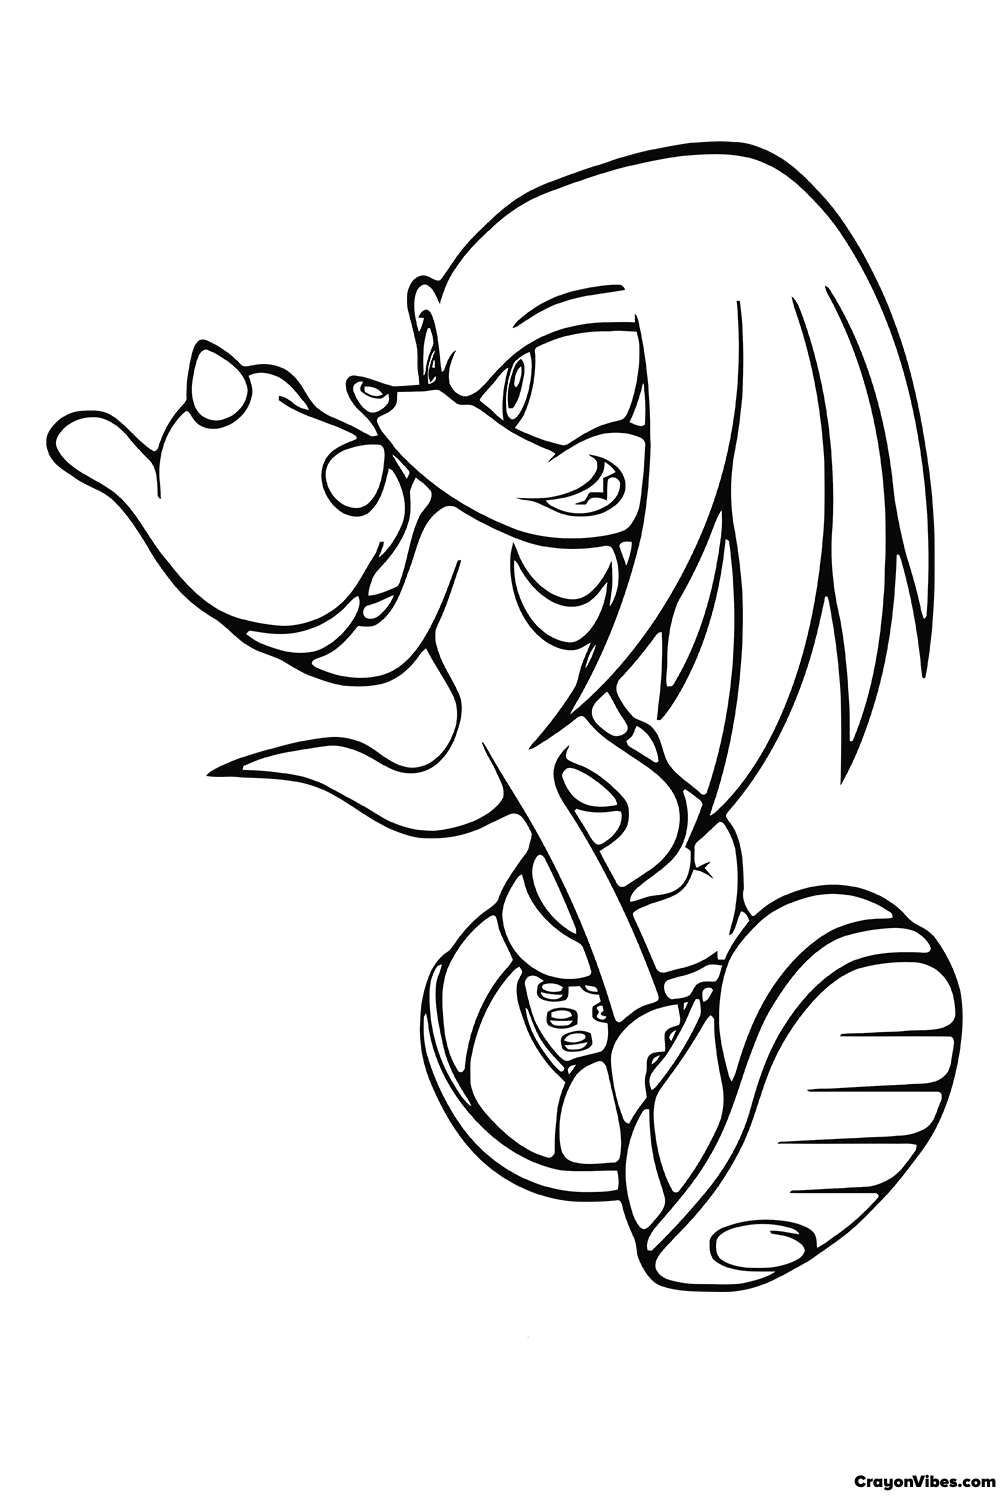 Knuckles Coloring Pages Free Printable for Kids & Adults